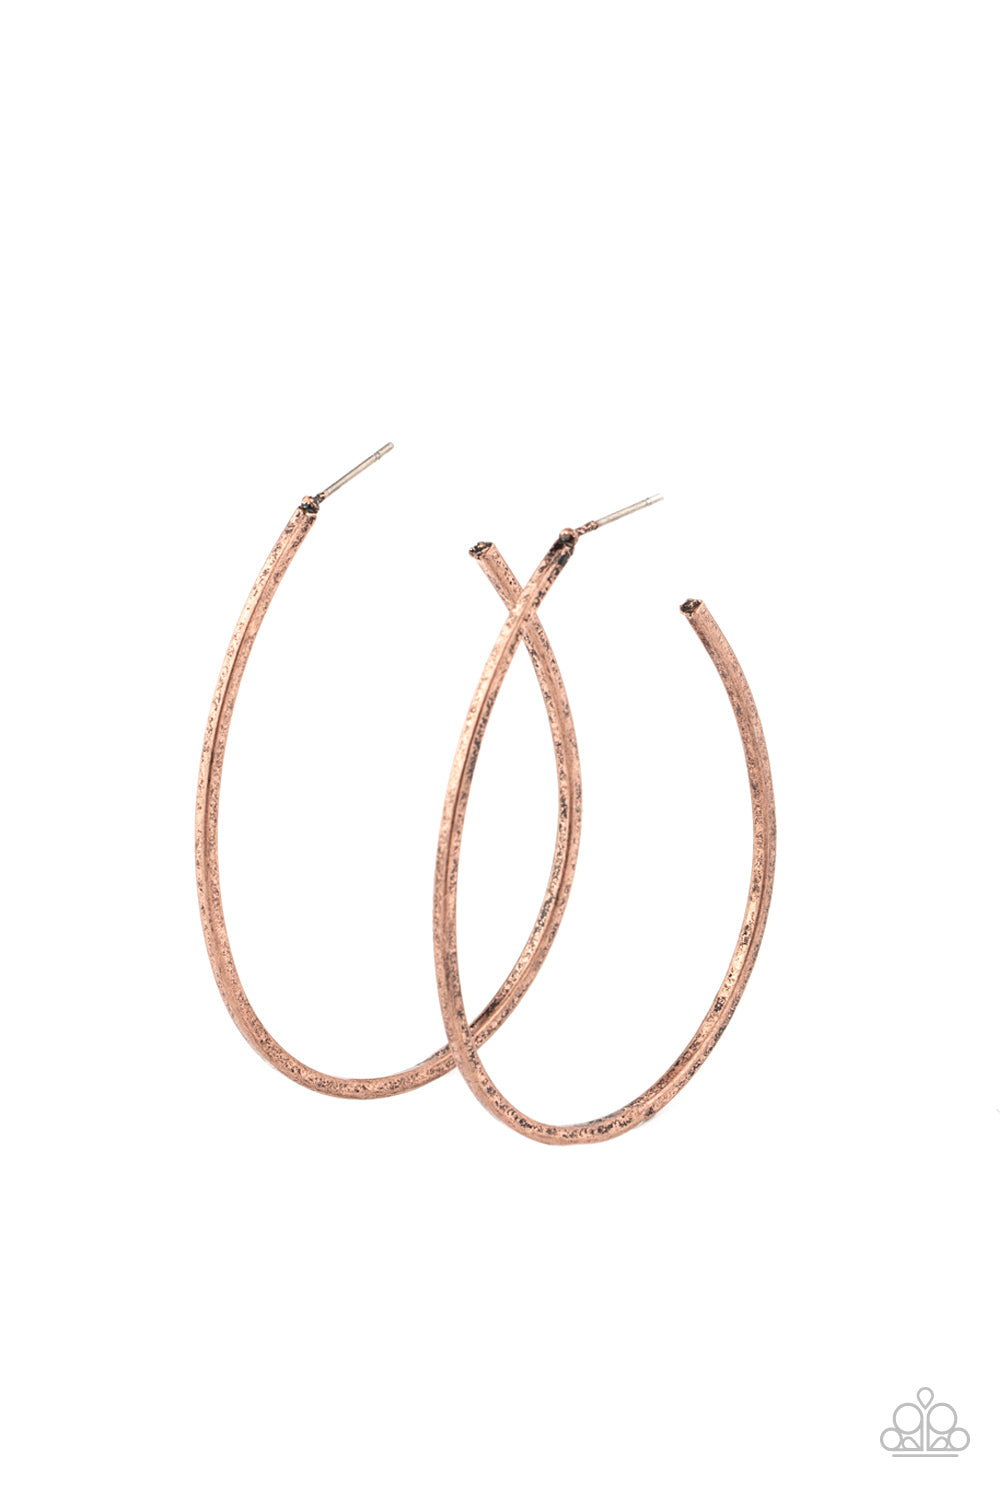 &lt;P&gt; An antiqued copper bar unexpectedly curls into an edgy shaped hoop for an abstract look. Earring attaches to a standard post fitting. Hoop measures approximately 1 3/4\&quot; in diameter.&lt;/P&gt;  

&lt;P&gt; &lt;I&gt;  Sold as one pair of hoop earrings. &lt;/I&gt;  &lt;/P&gt;


&lt;img src=\&quot;https://d9b54x484lq62.cloudfront.net/paparazzi/shopping/images/517_tag150x115_1.png\&quot; alt=\&quot;New Kit\&quot; align=\&quot;middle\&quot; height=\&quot;50\&quot; width=\&quot;50\&quot;/&gt;